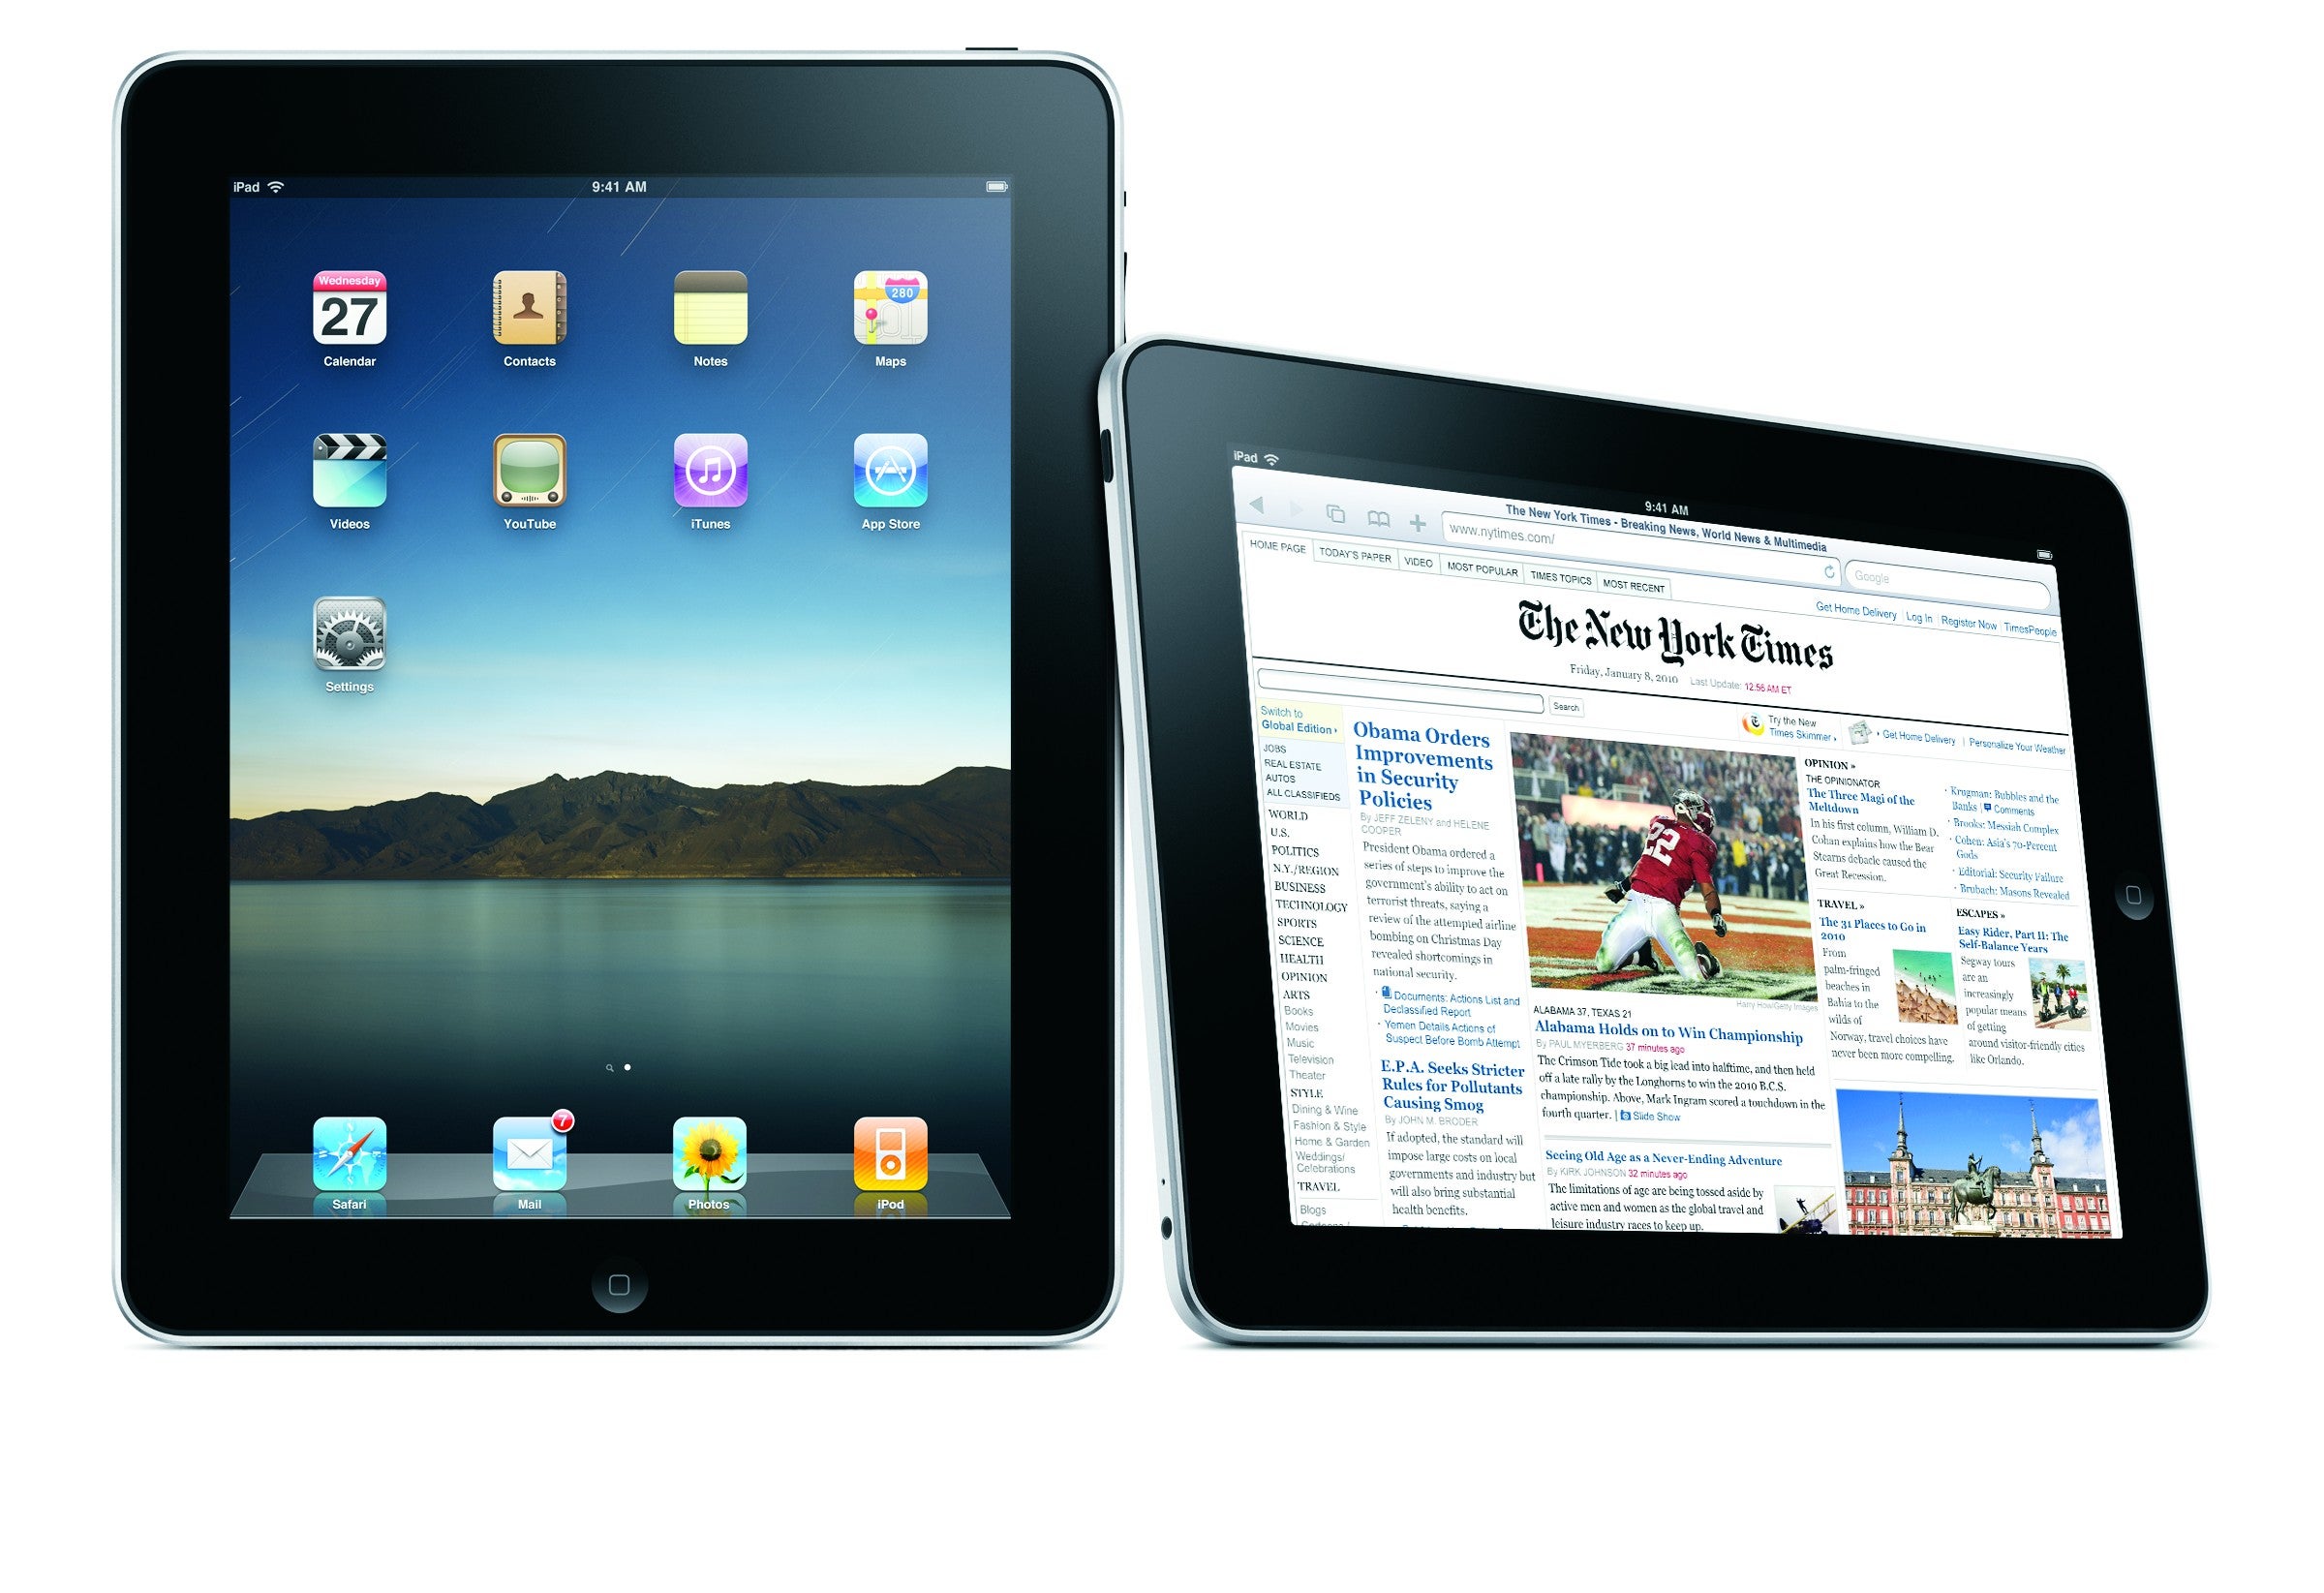 The Apple iPad 2 had a 62% market share at the end of 2011 - Apple iPhone 4S was the biggest competitor for the Apple iPad 2 in holiday quarter